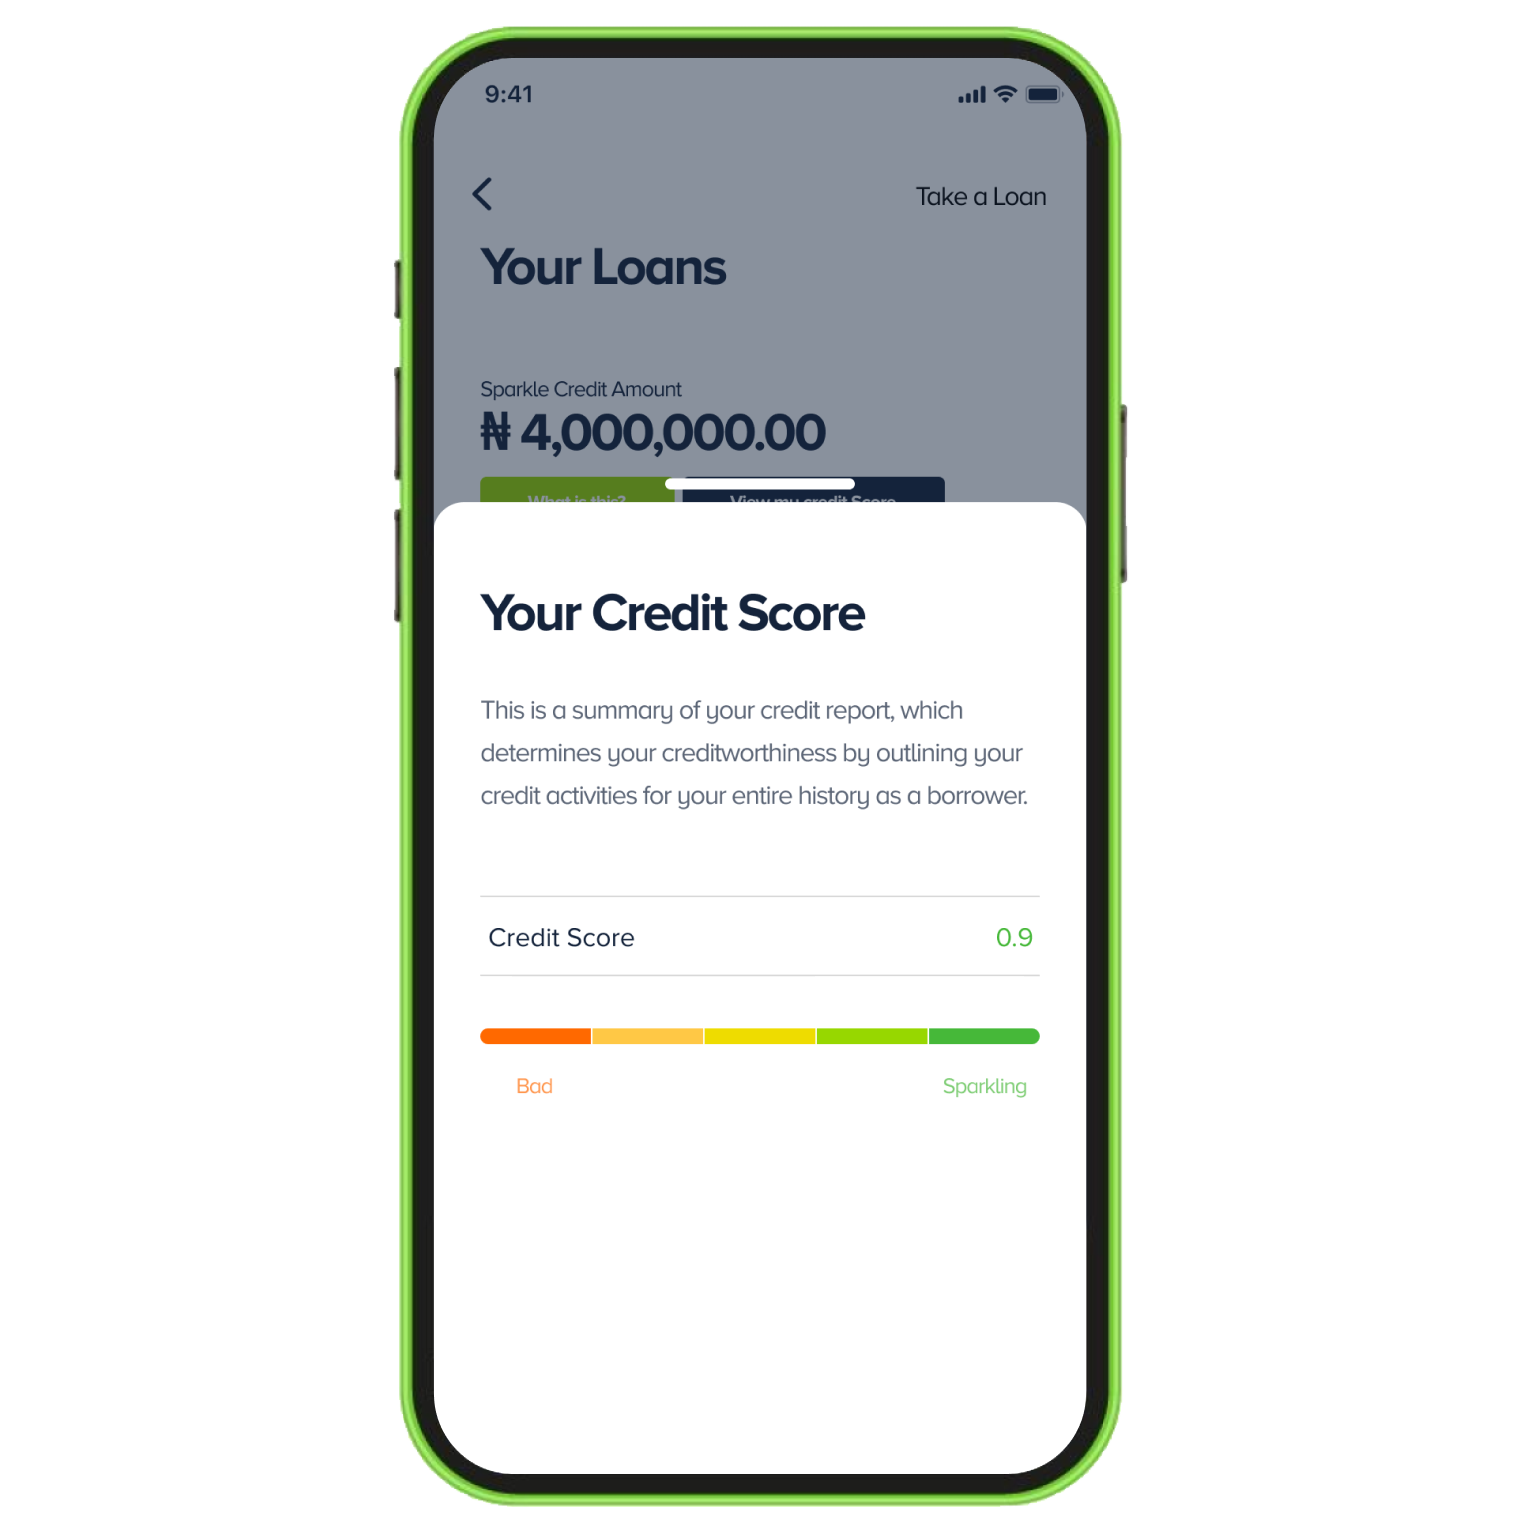 To get started: Open a Sparkle account, fund your account, and start carrying out transactions to increase your Loyalty Level and eligibility for Sparkle Loan.